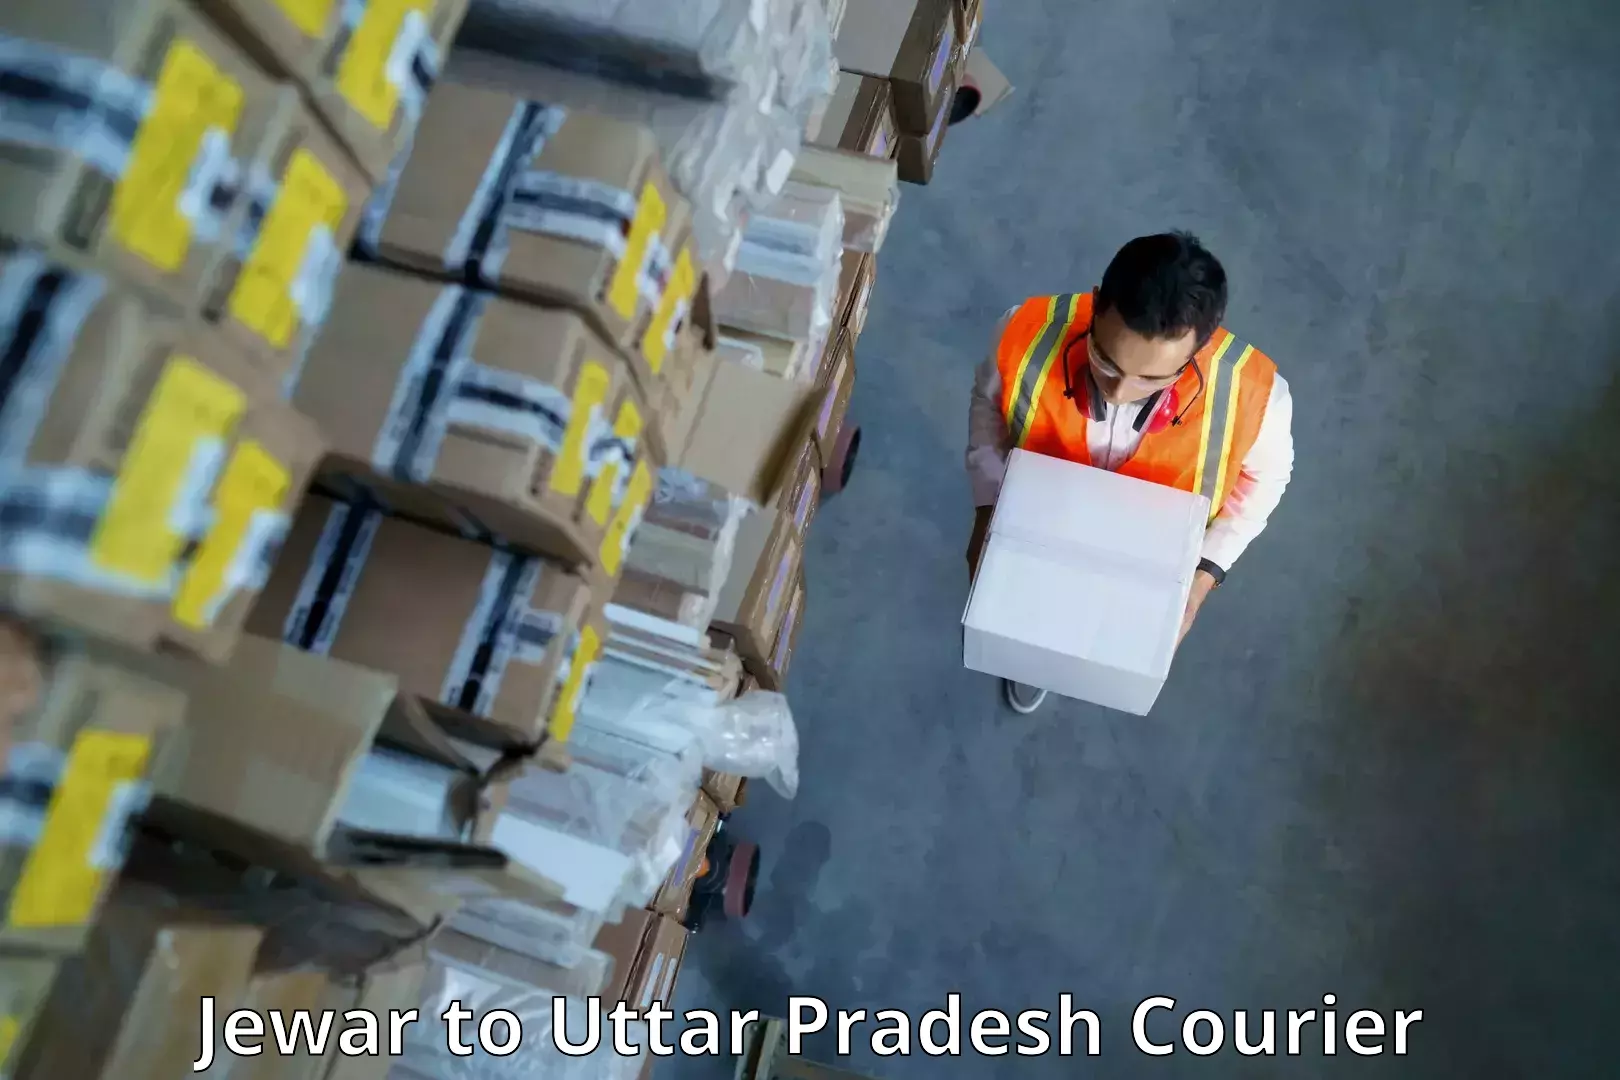 State-of-the-art courier technology Jewar to Koraon